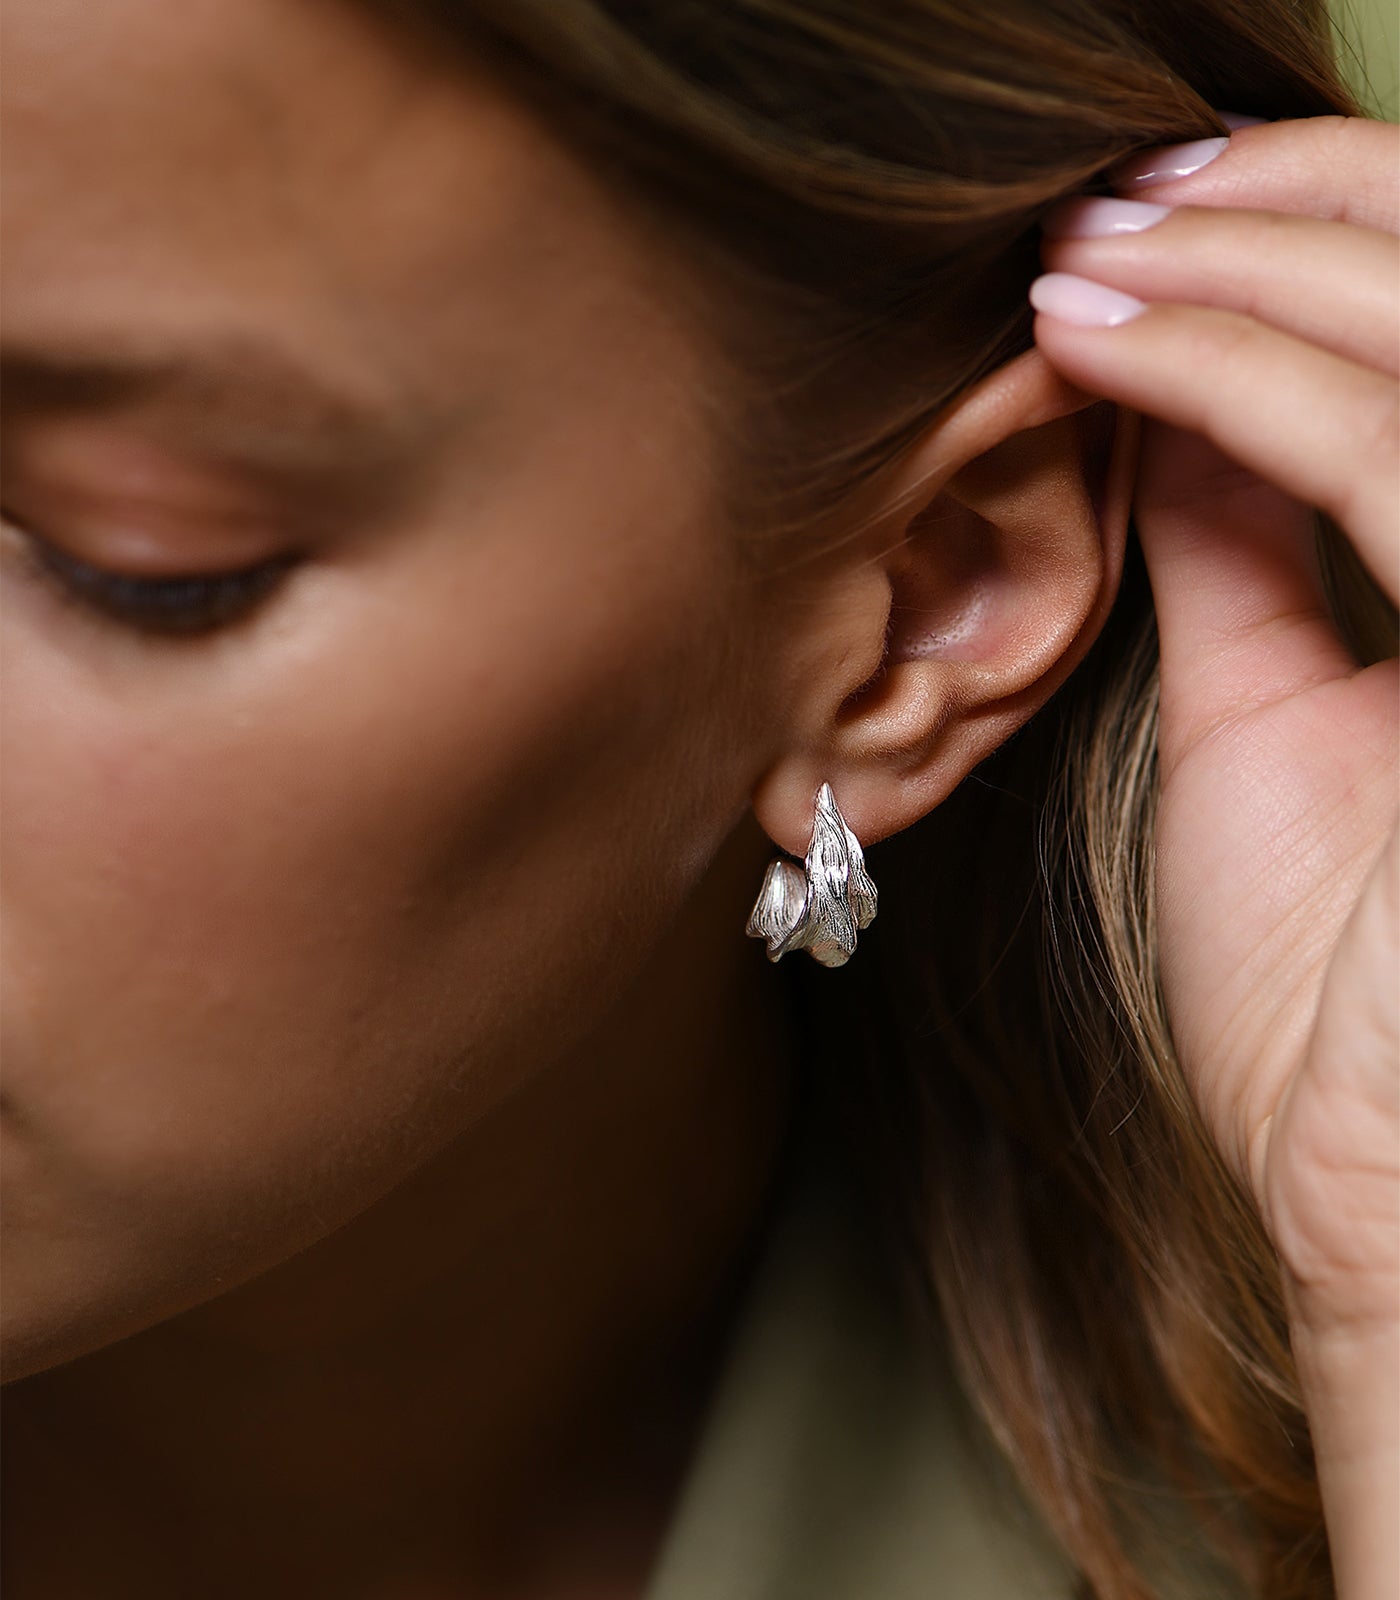 A model wears a pair of sterling silver, hoop earrings which are textured to resemble an aquatic leaf.